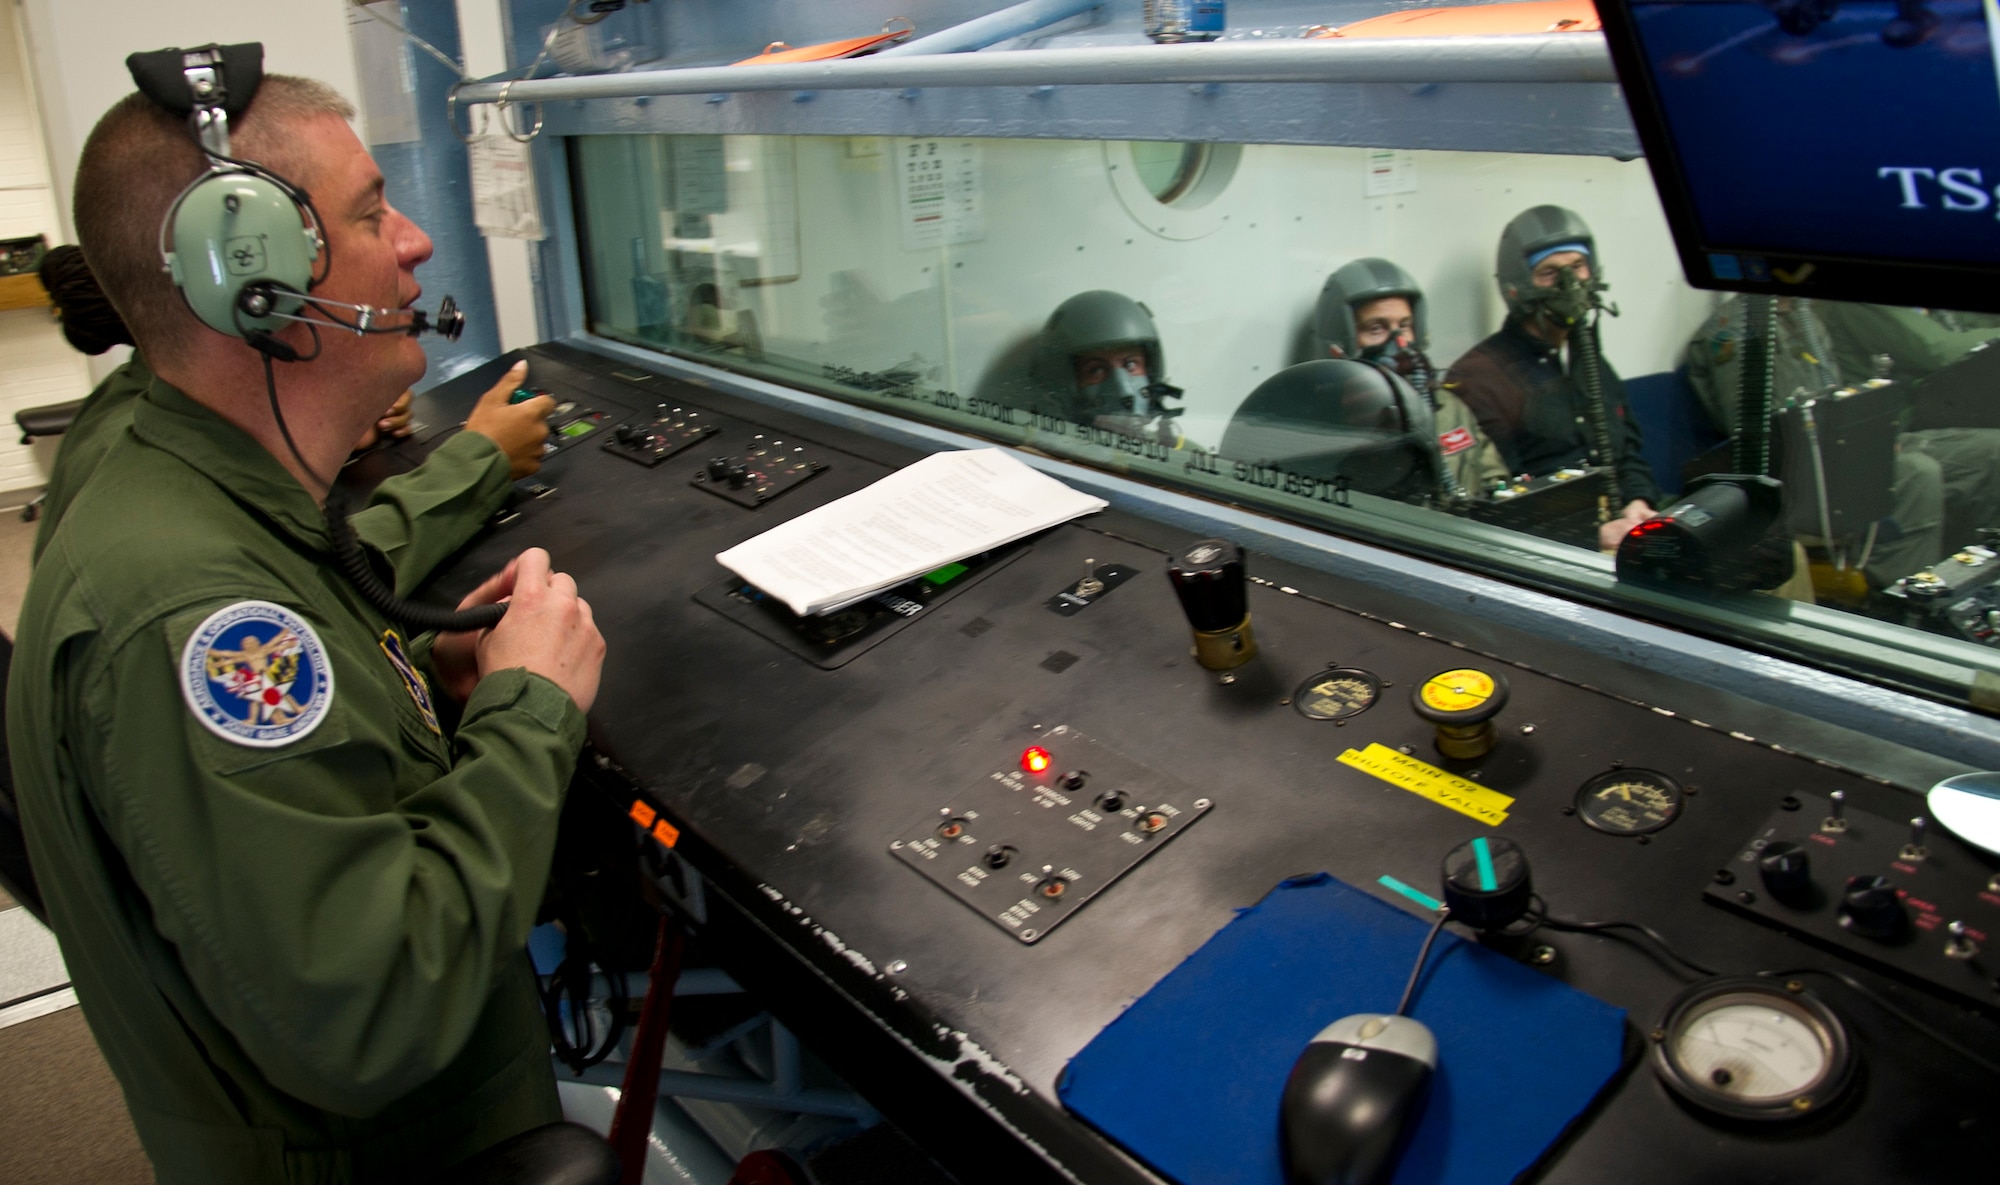 Tech. Sgt. Nicholas Haight (left), 779th Aerospace Medical Squadron flight chief, explains hypoxia symptoms to military and civilian personnel sitting inside an altitude chamber during flight simulation training March 16, 2017, at Joint Base Andrews, Md. Later in the training, the students were exposed to varying levels of air pressure as they would experience at different altitudes. (U.S. Air Force photo by Staff Sgt. Joe Yanik)